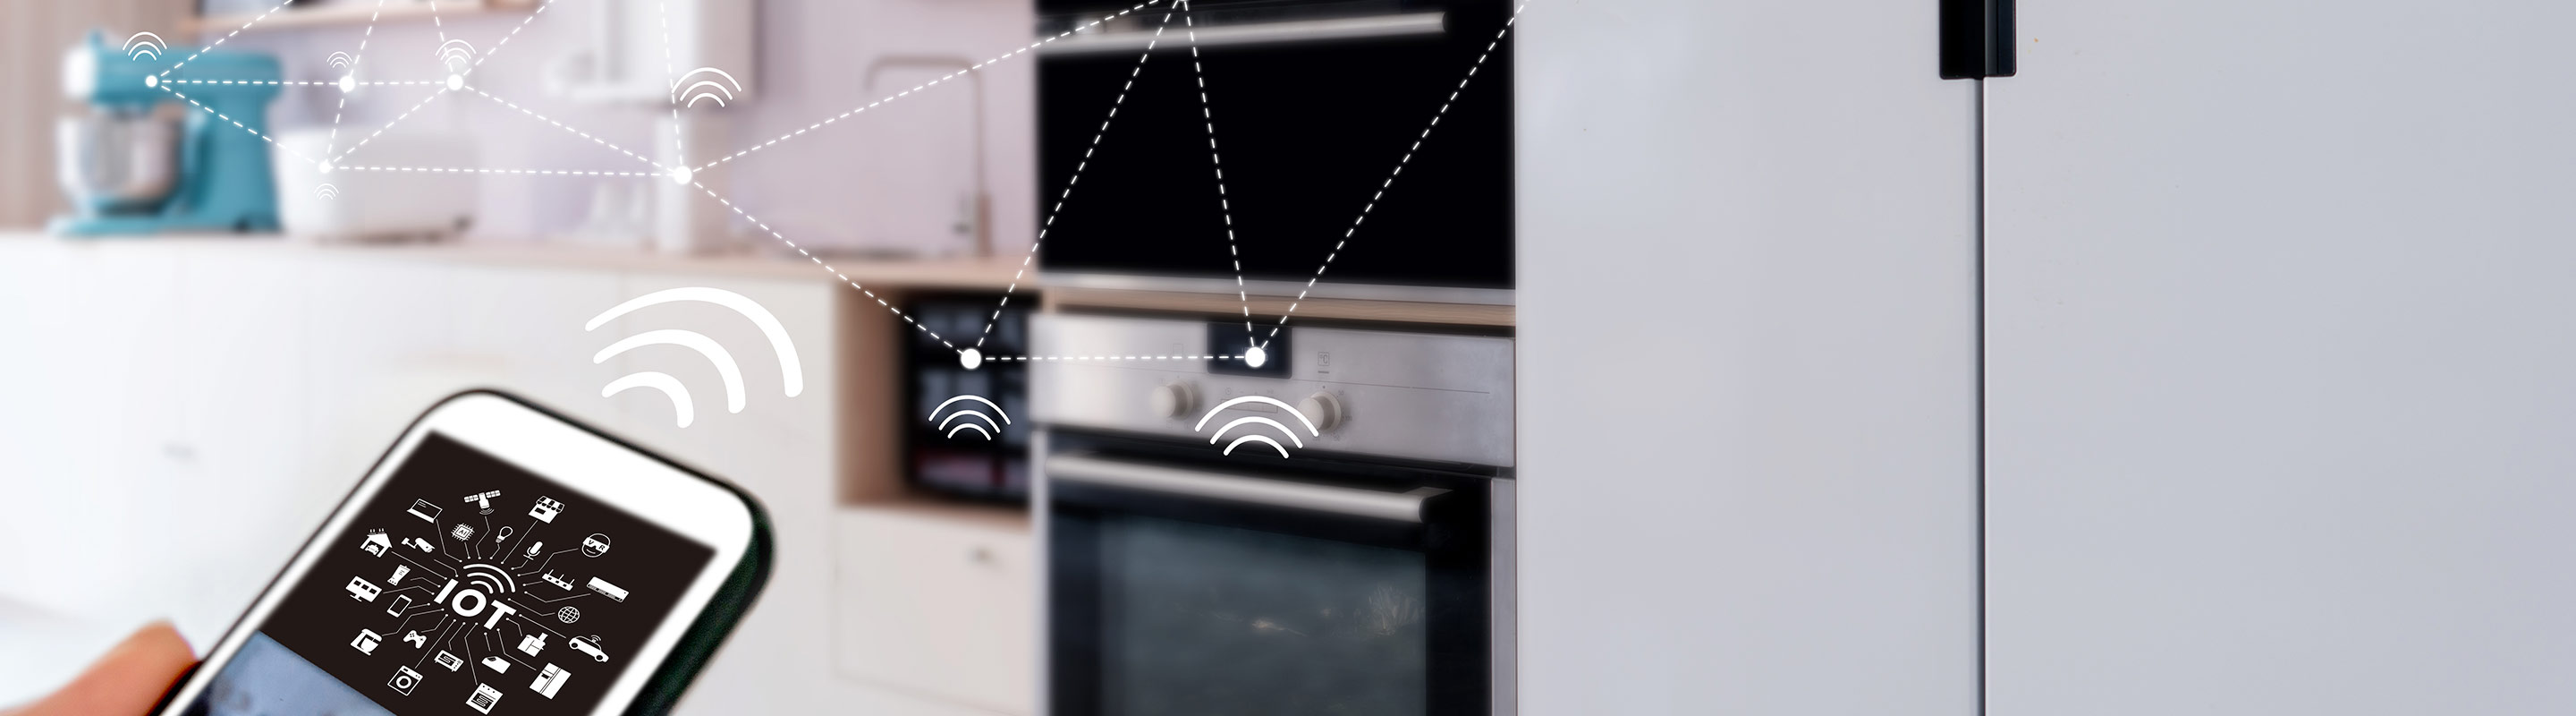 IoT illustration with a kitchen in the background